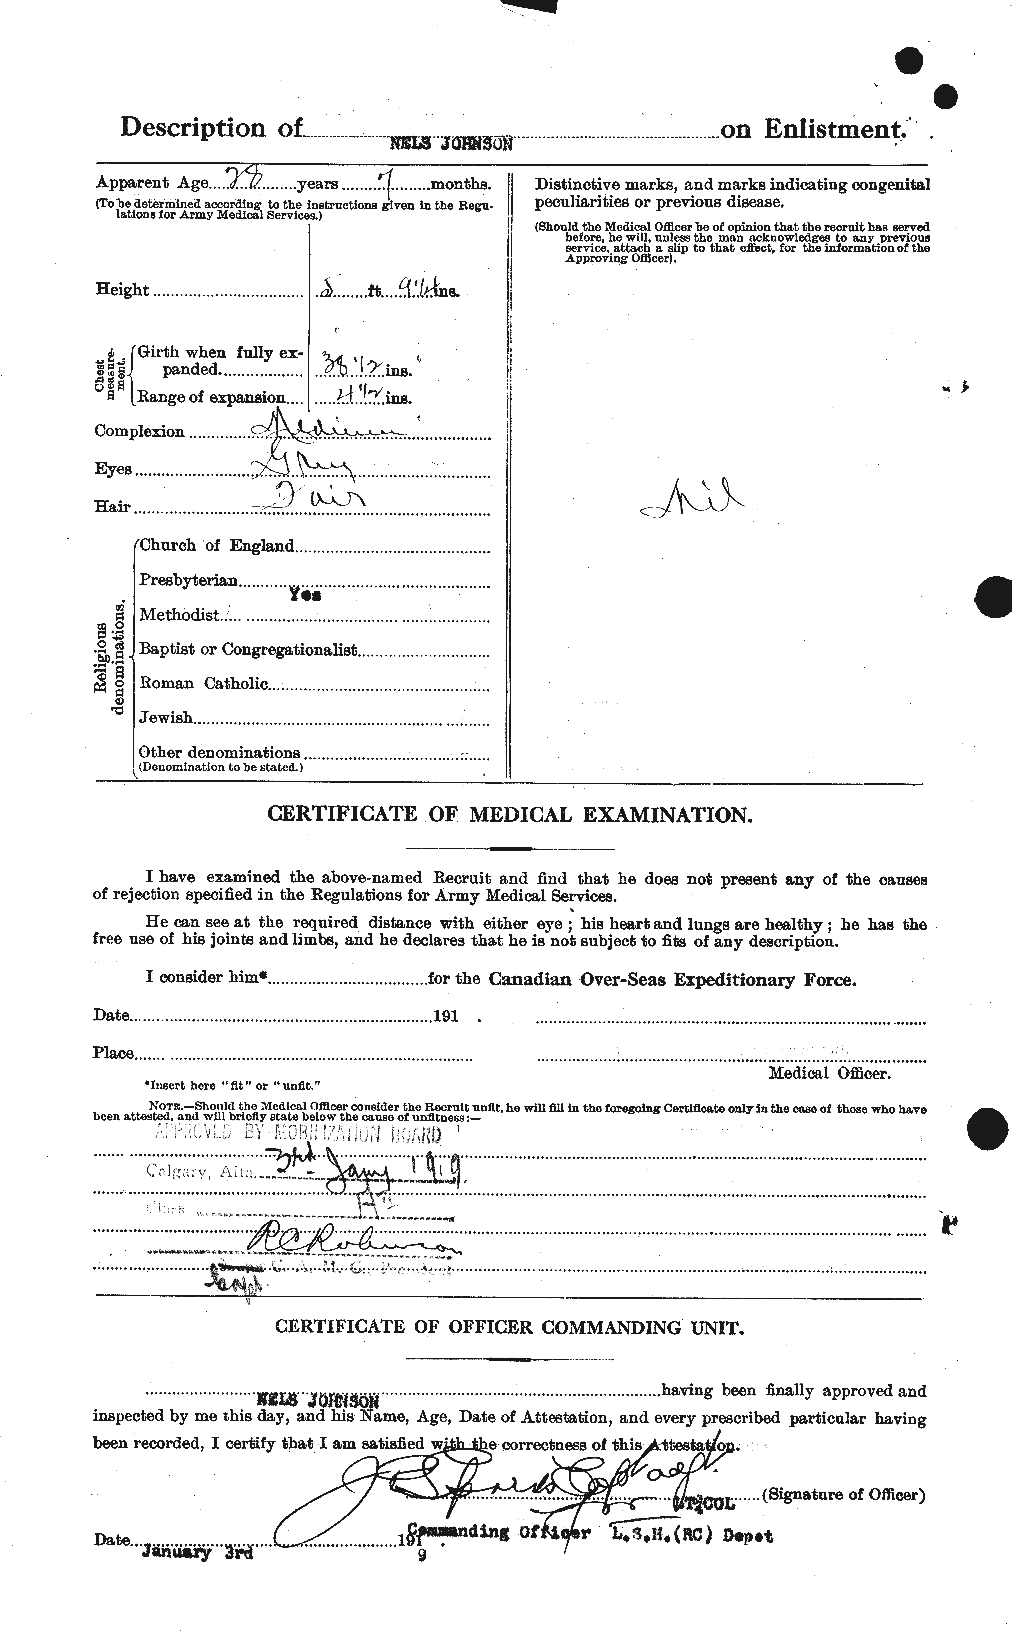 Personnel Records of the First World War - CEF 422158b